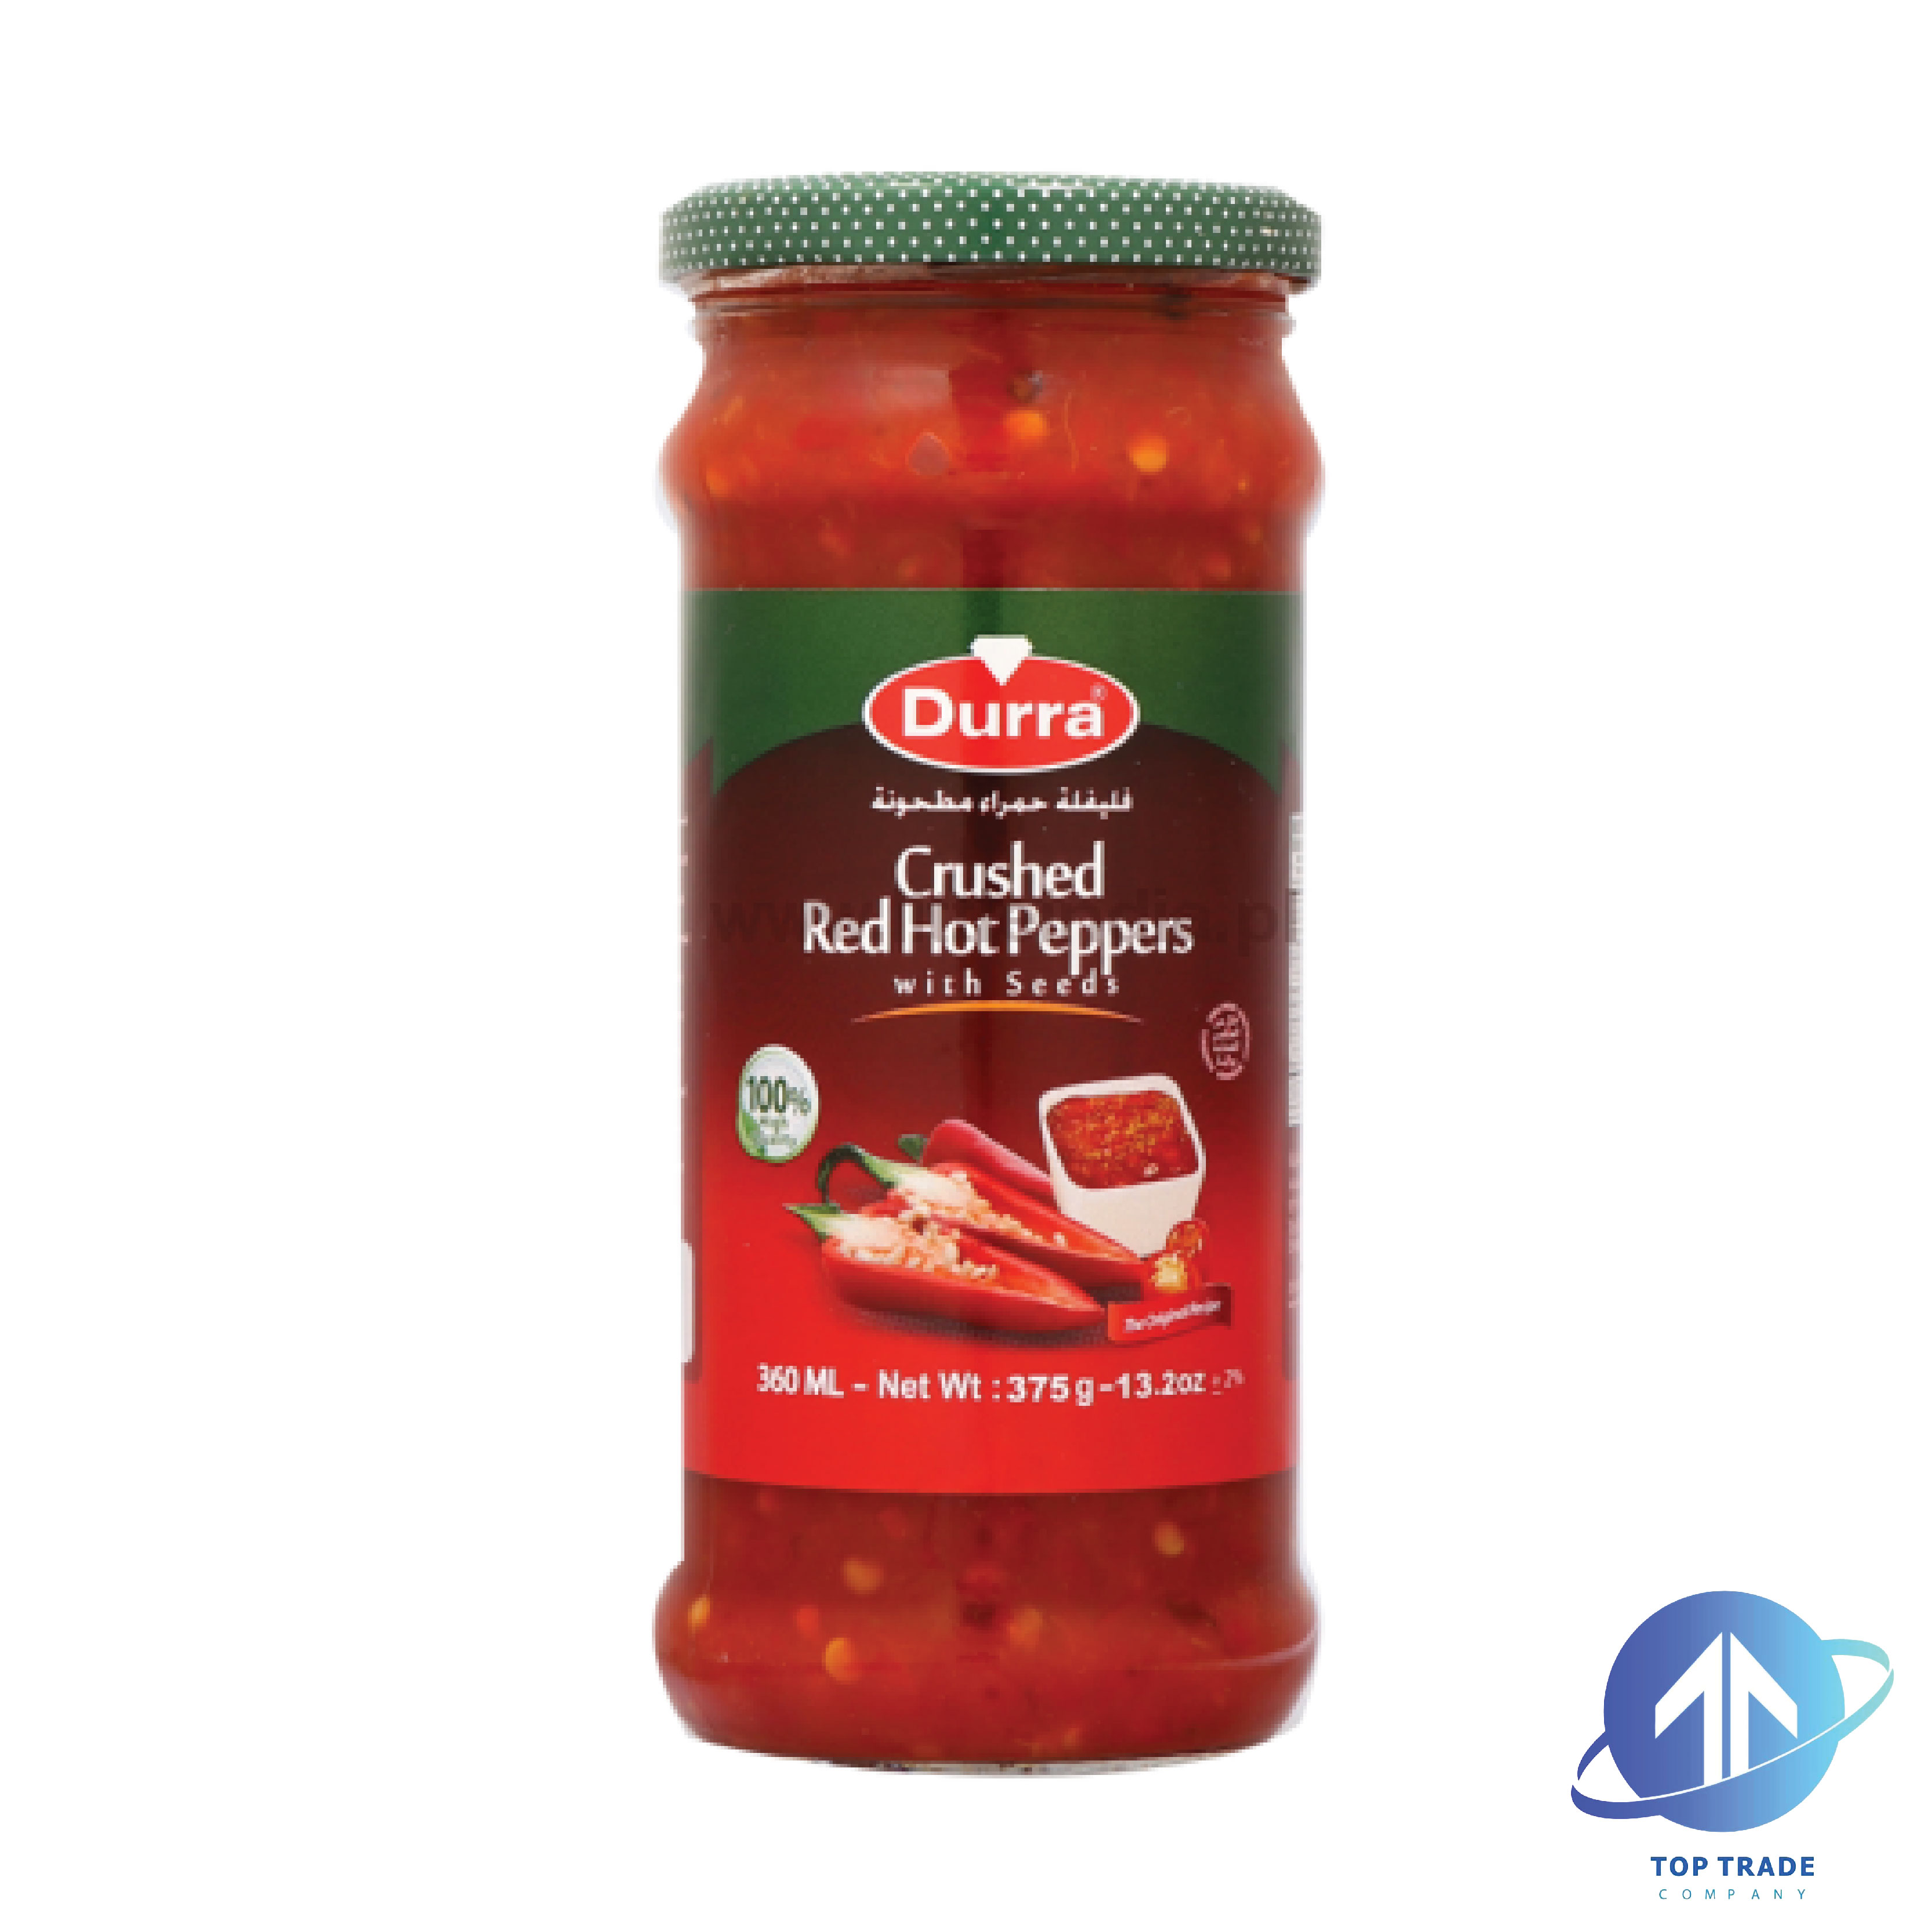 Durra Crushed red hot peppers 375gr 